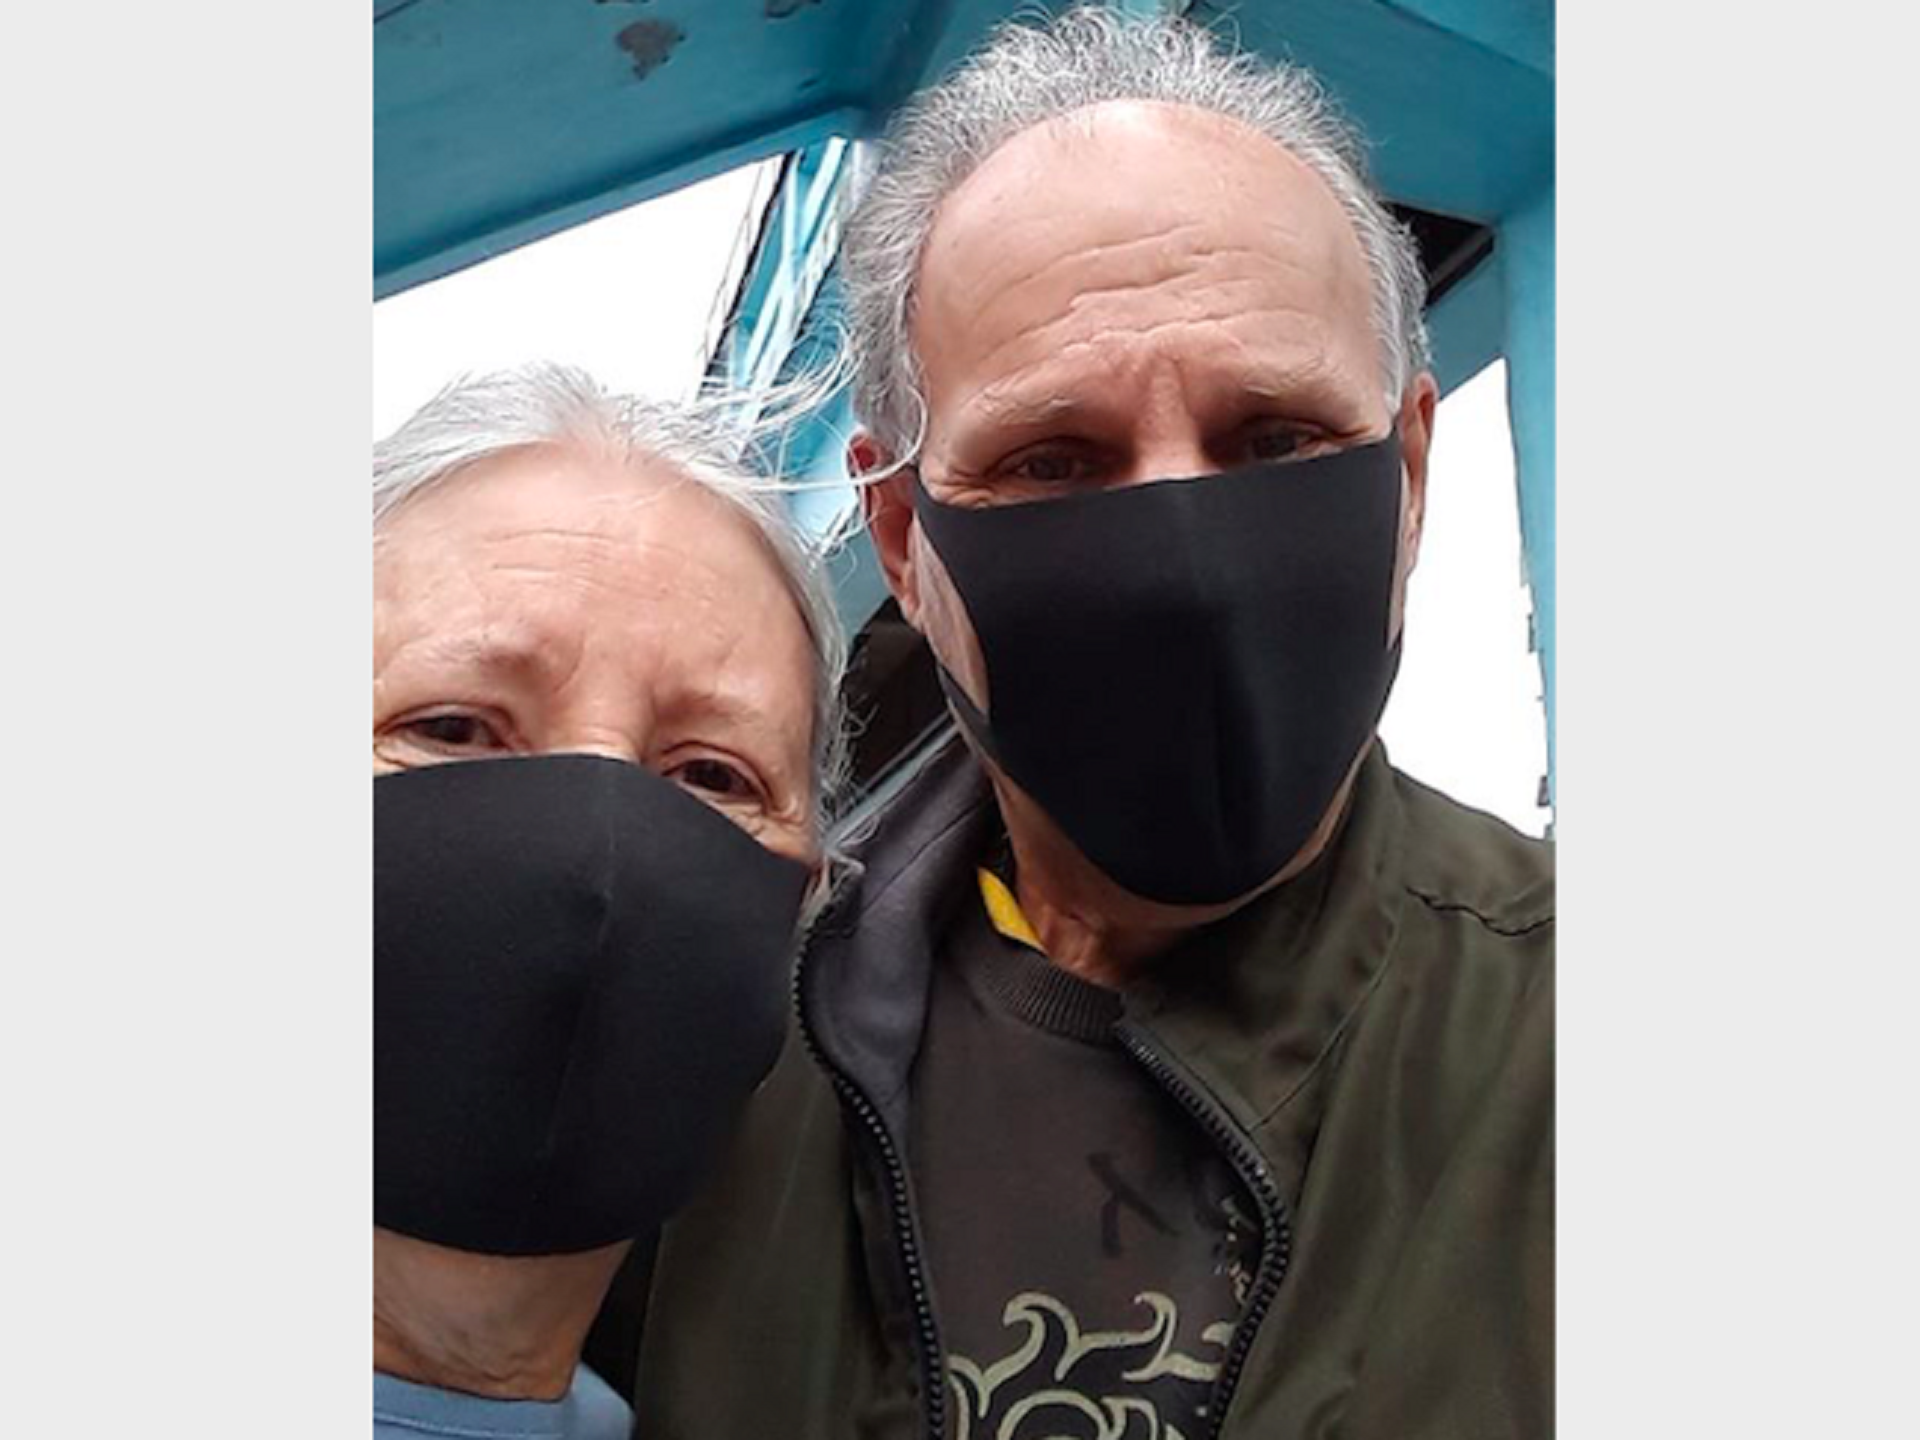 Bill and Colette Smedley, of Dillsburg, were scheduled to come home Monday after being quarantined for a month after someone on their cruise ship tested positive for the coronavirus. Their flight home was canceled Monday after someone else in Texas, where they're currently quarantined, tested positive.